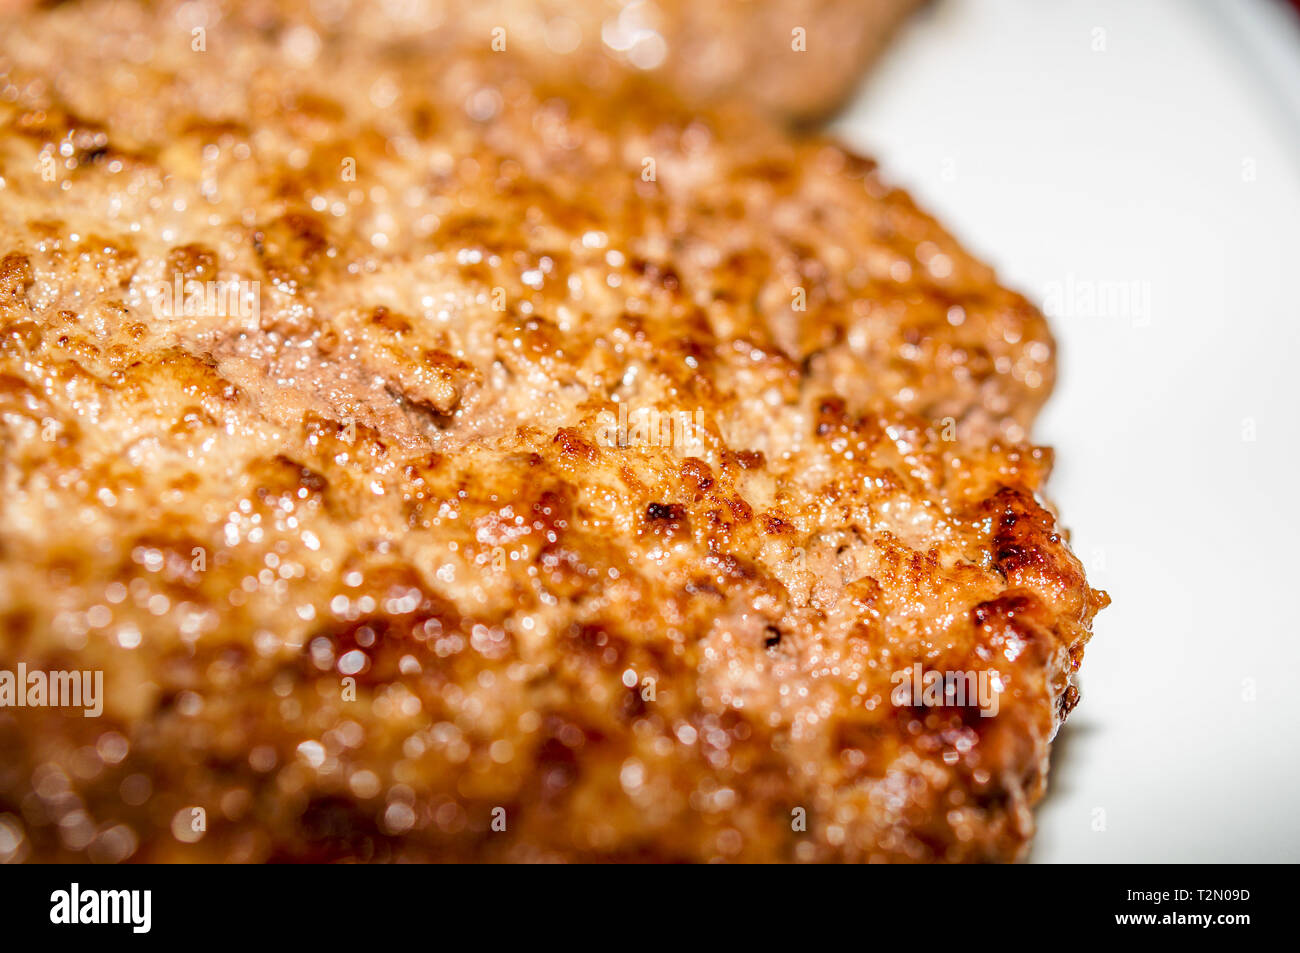 Chicken burger without a bun Stock Photo